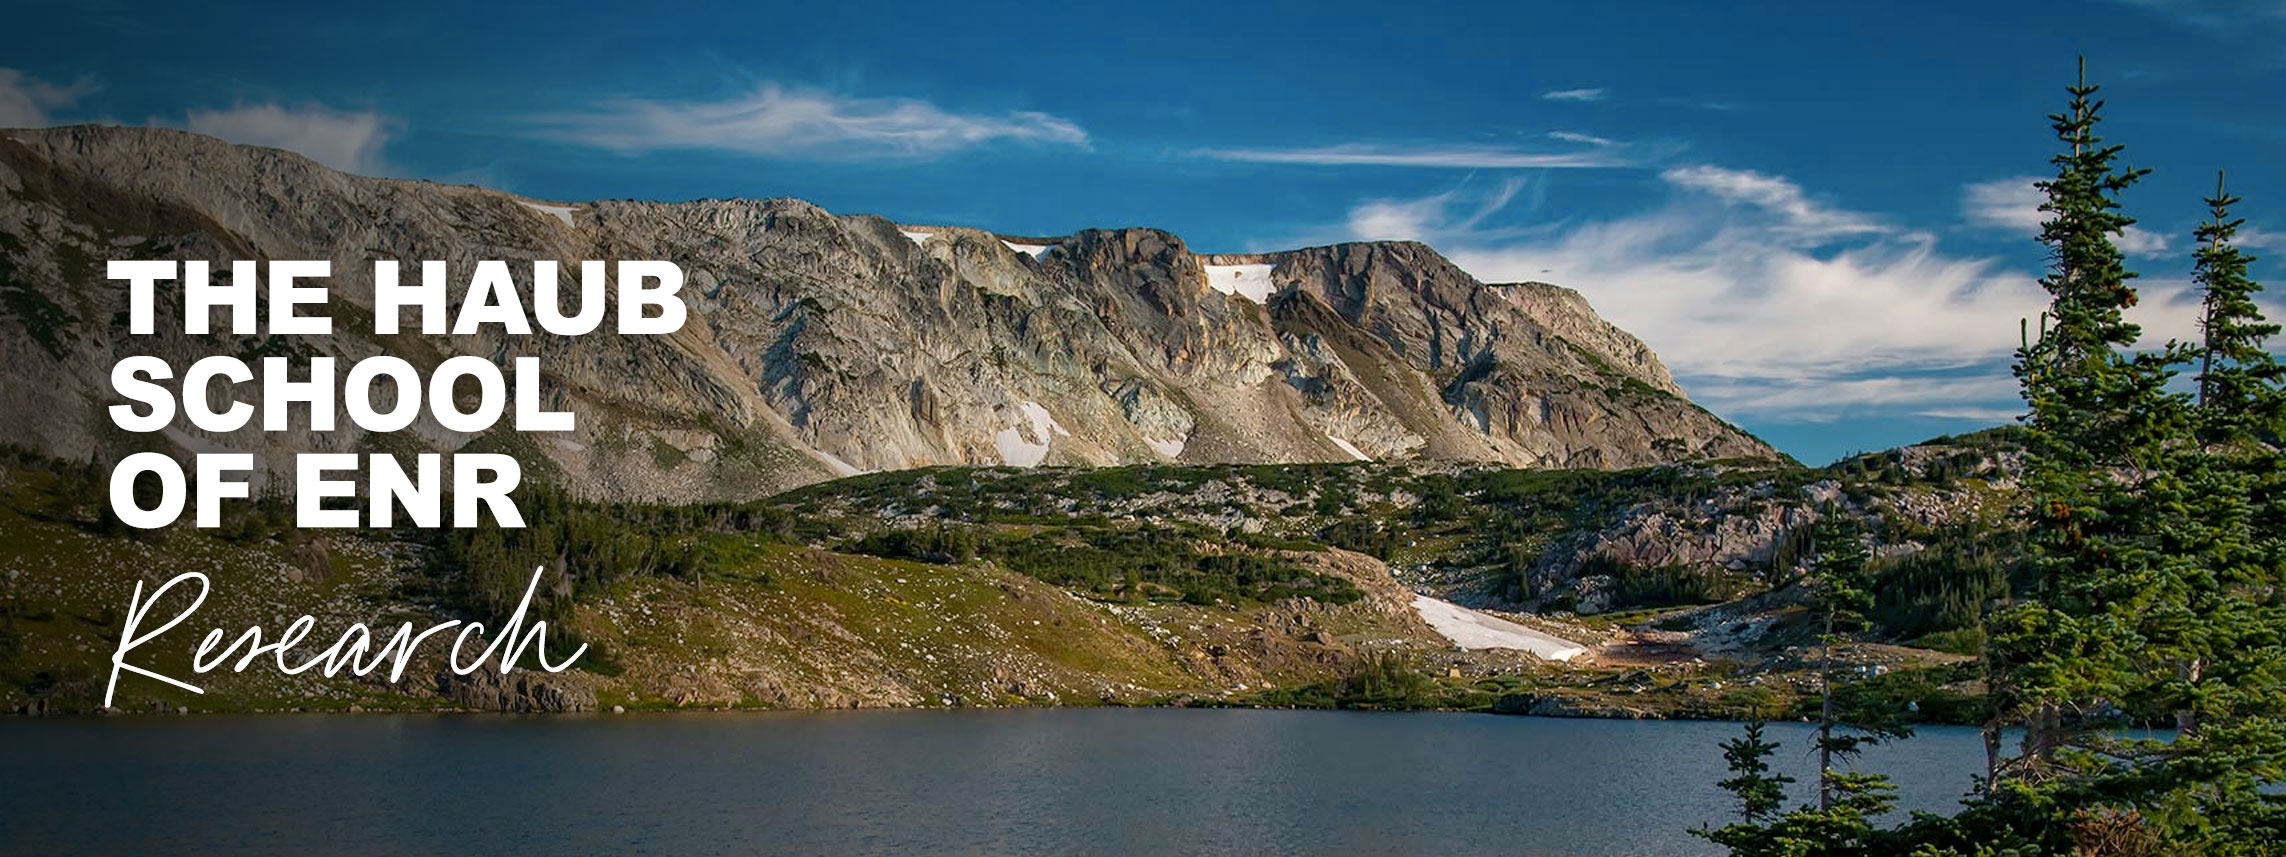 The Haub School of ENR Research: Medicine Bow Mountains